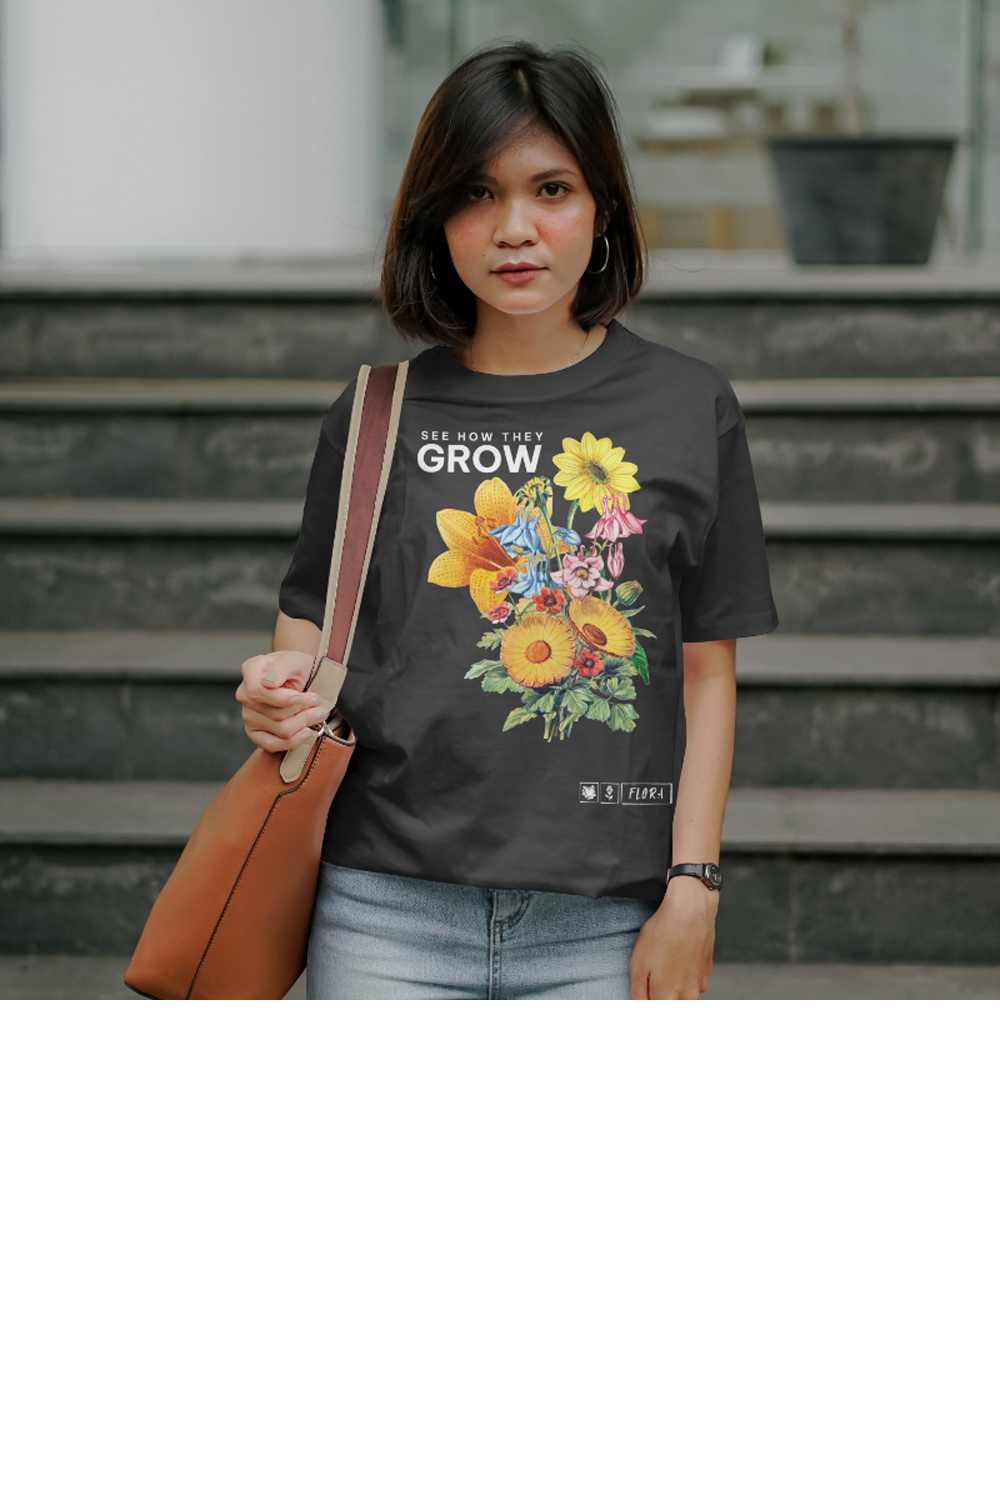 SEE HOW THEY GROW – Quotes T-Shirt Design pinterest preview image.